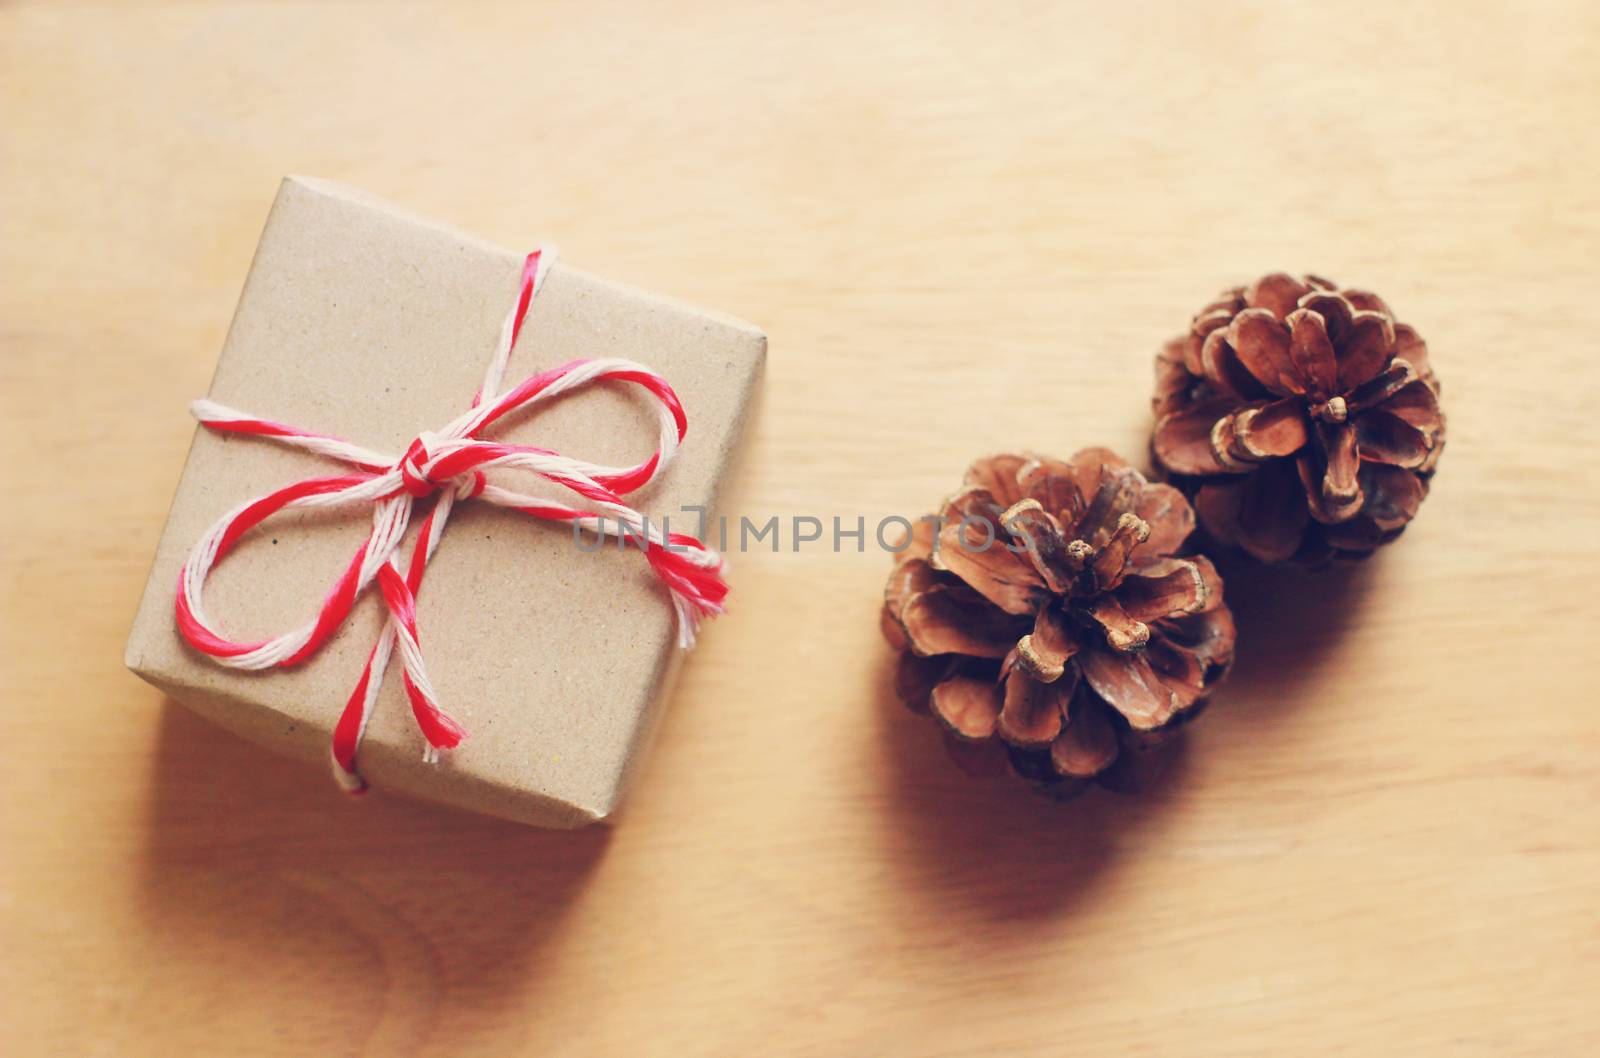 Handmade gift box and pine cone with retro filter effect